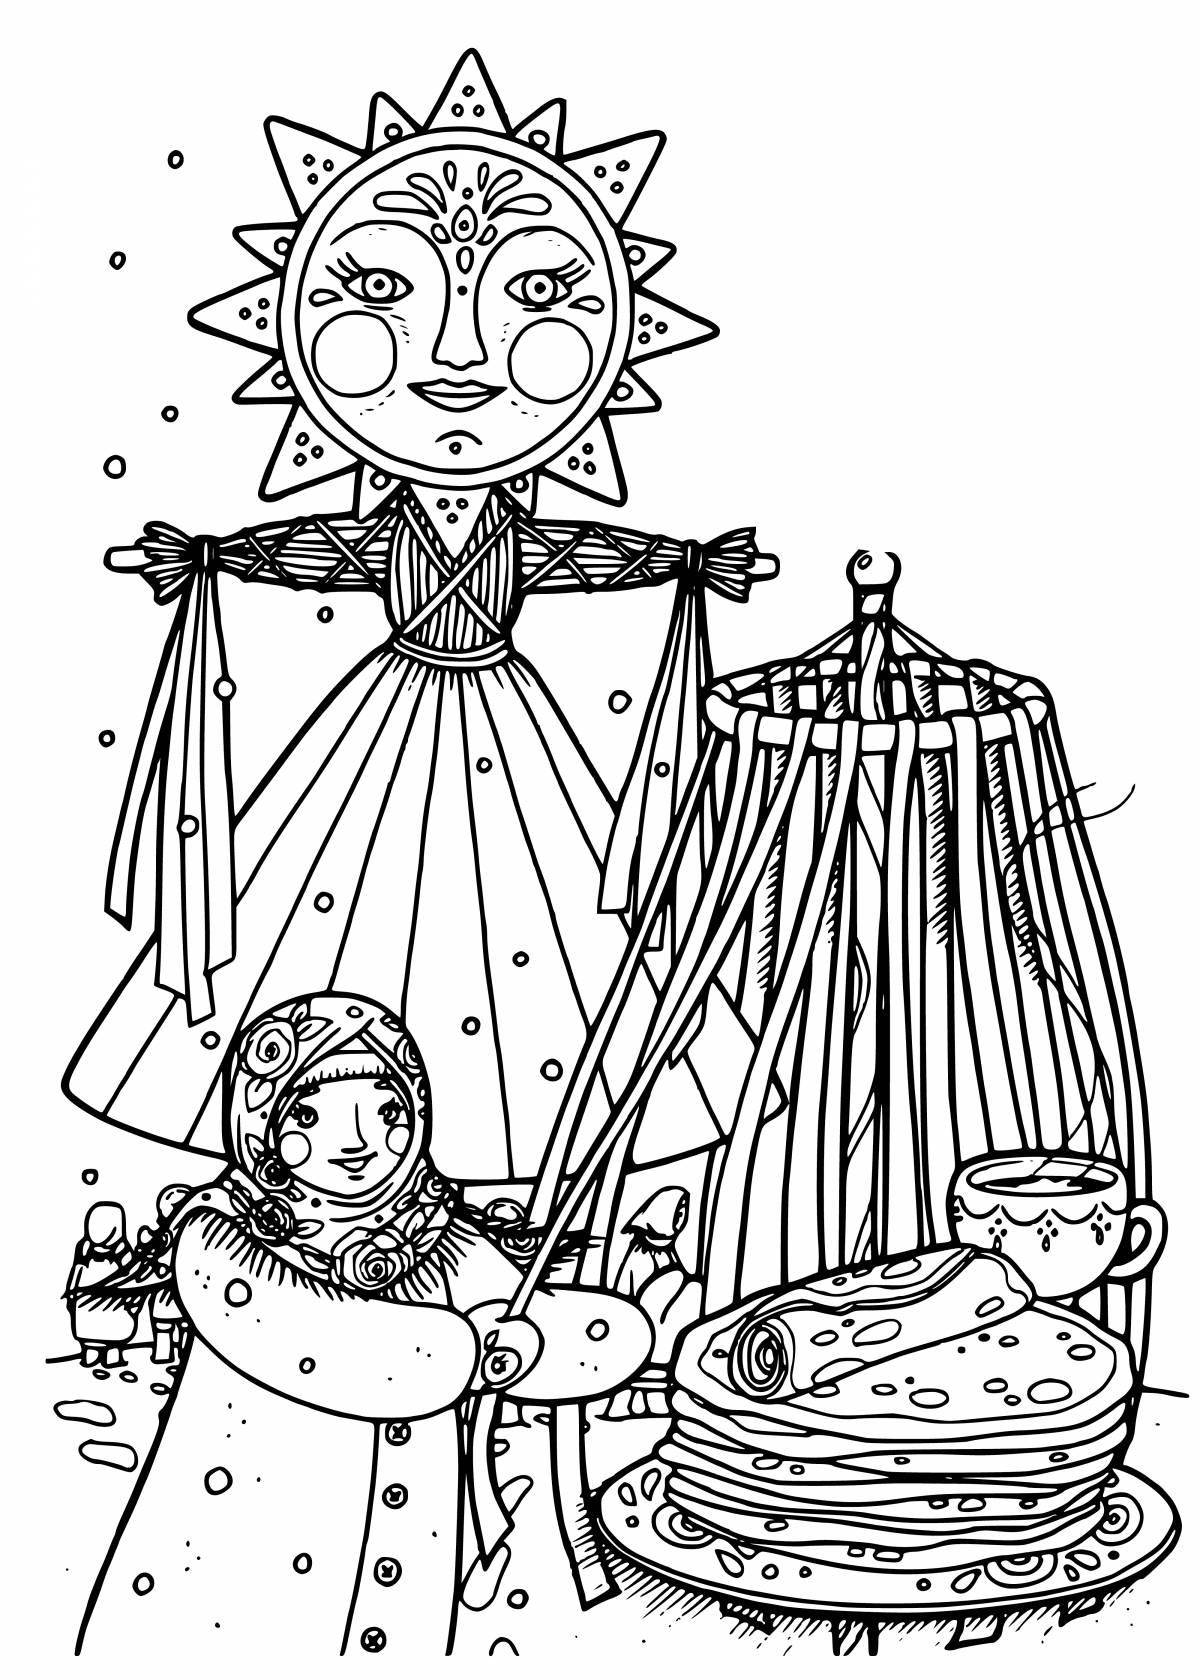 Coloring page happy carnival